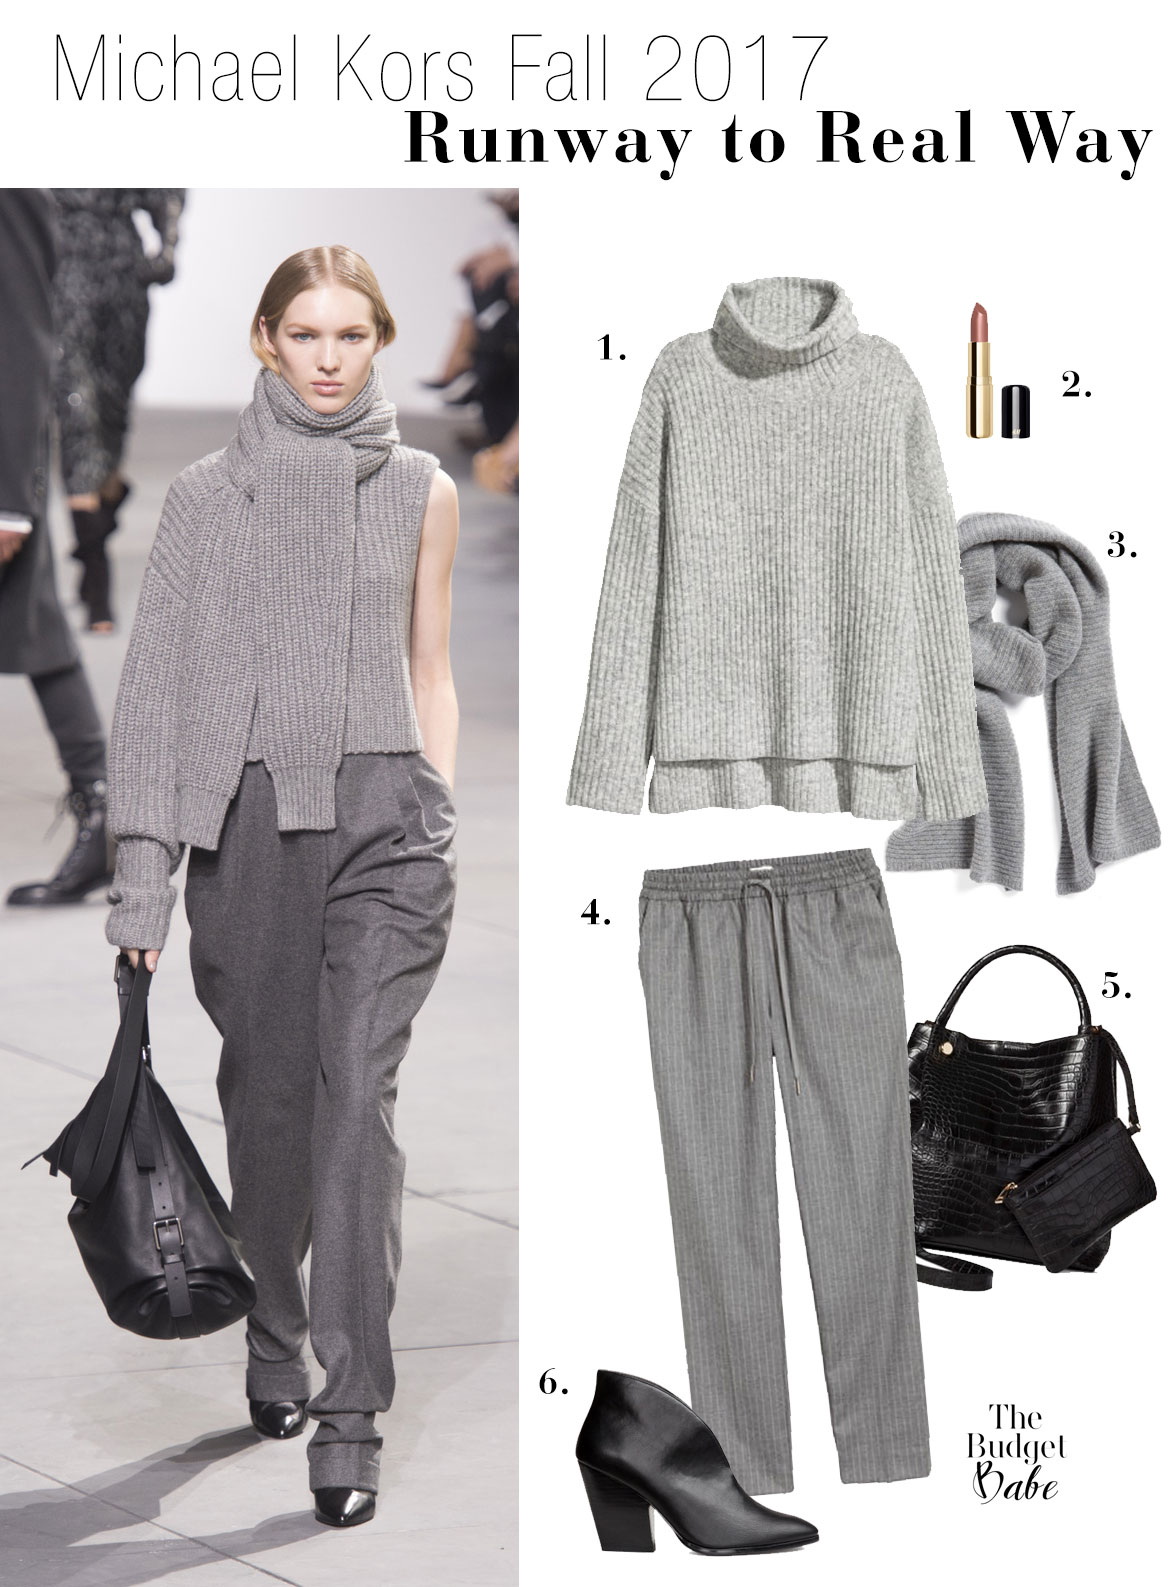 Take style cues from the Michael Kors Fall 2017 runway show in this monochromatic gray power look.